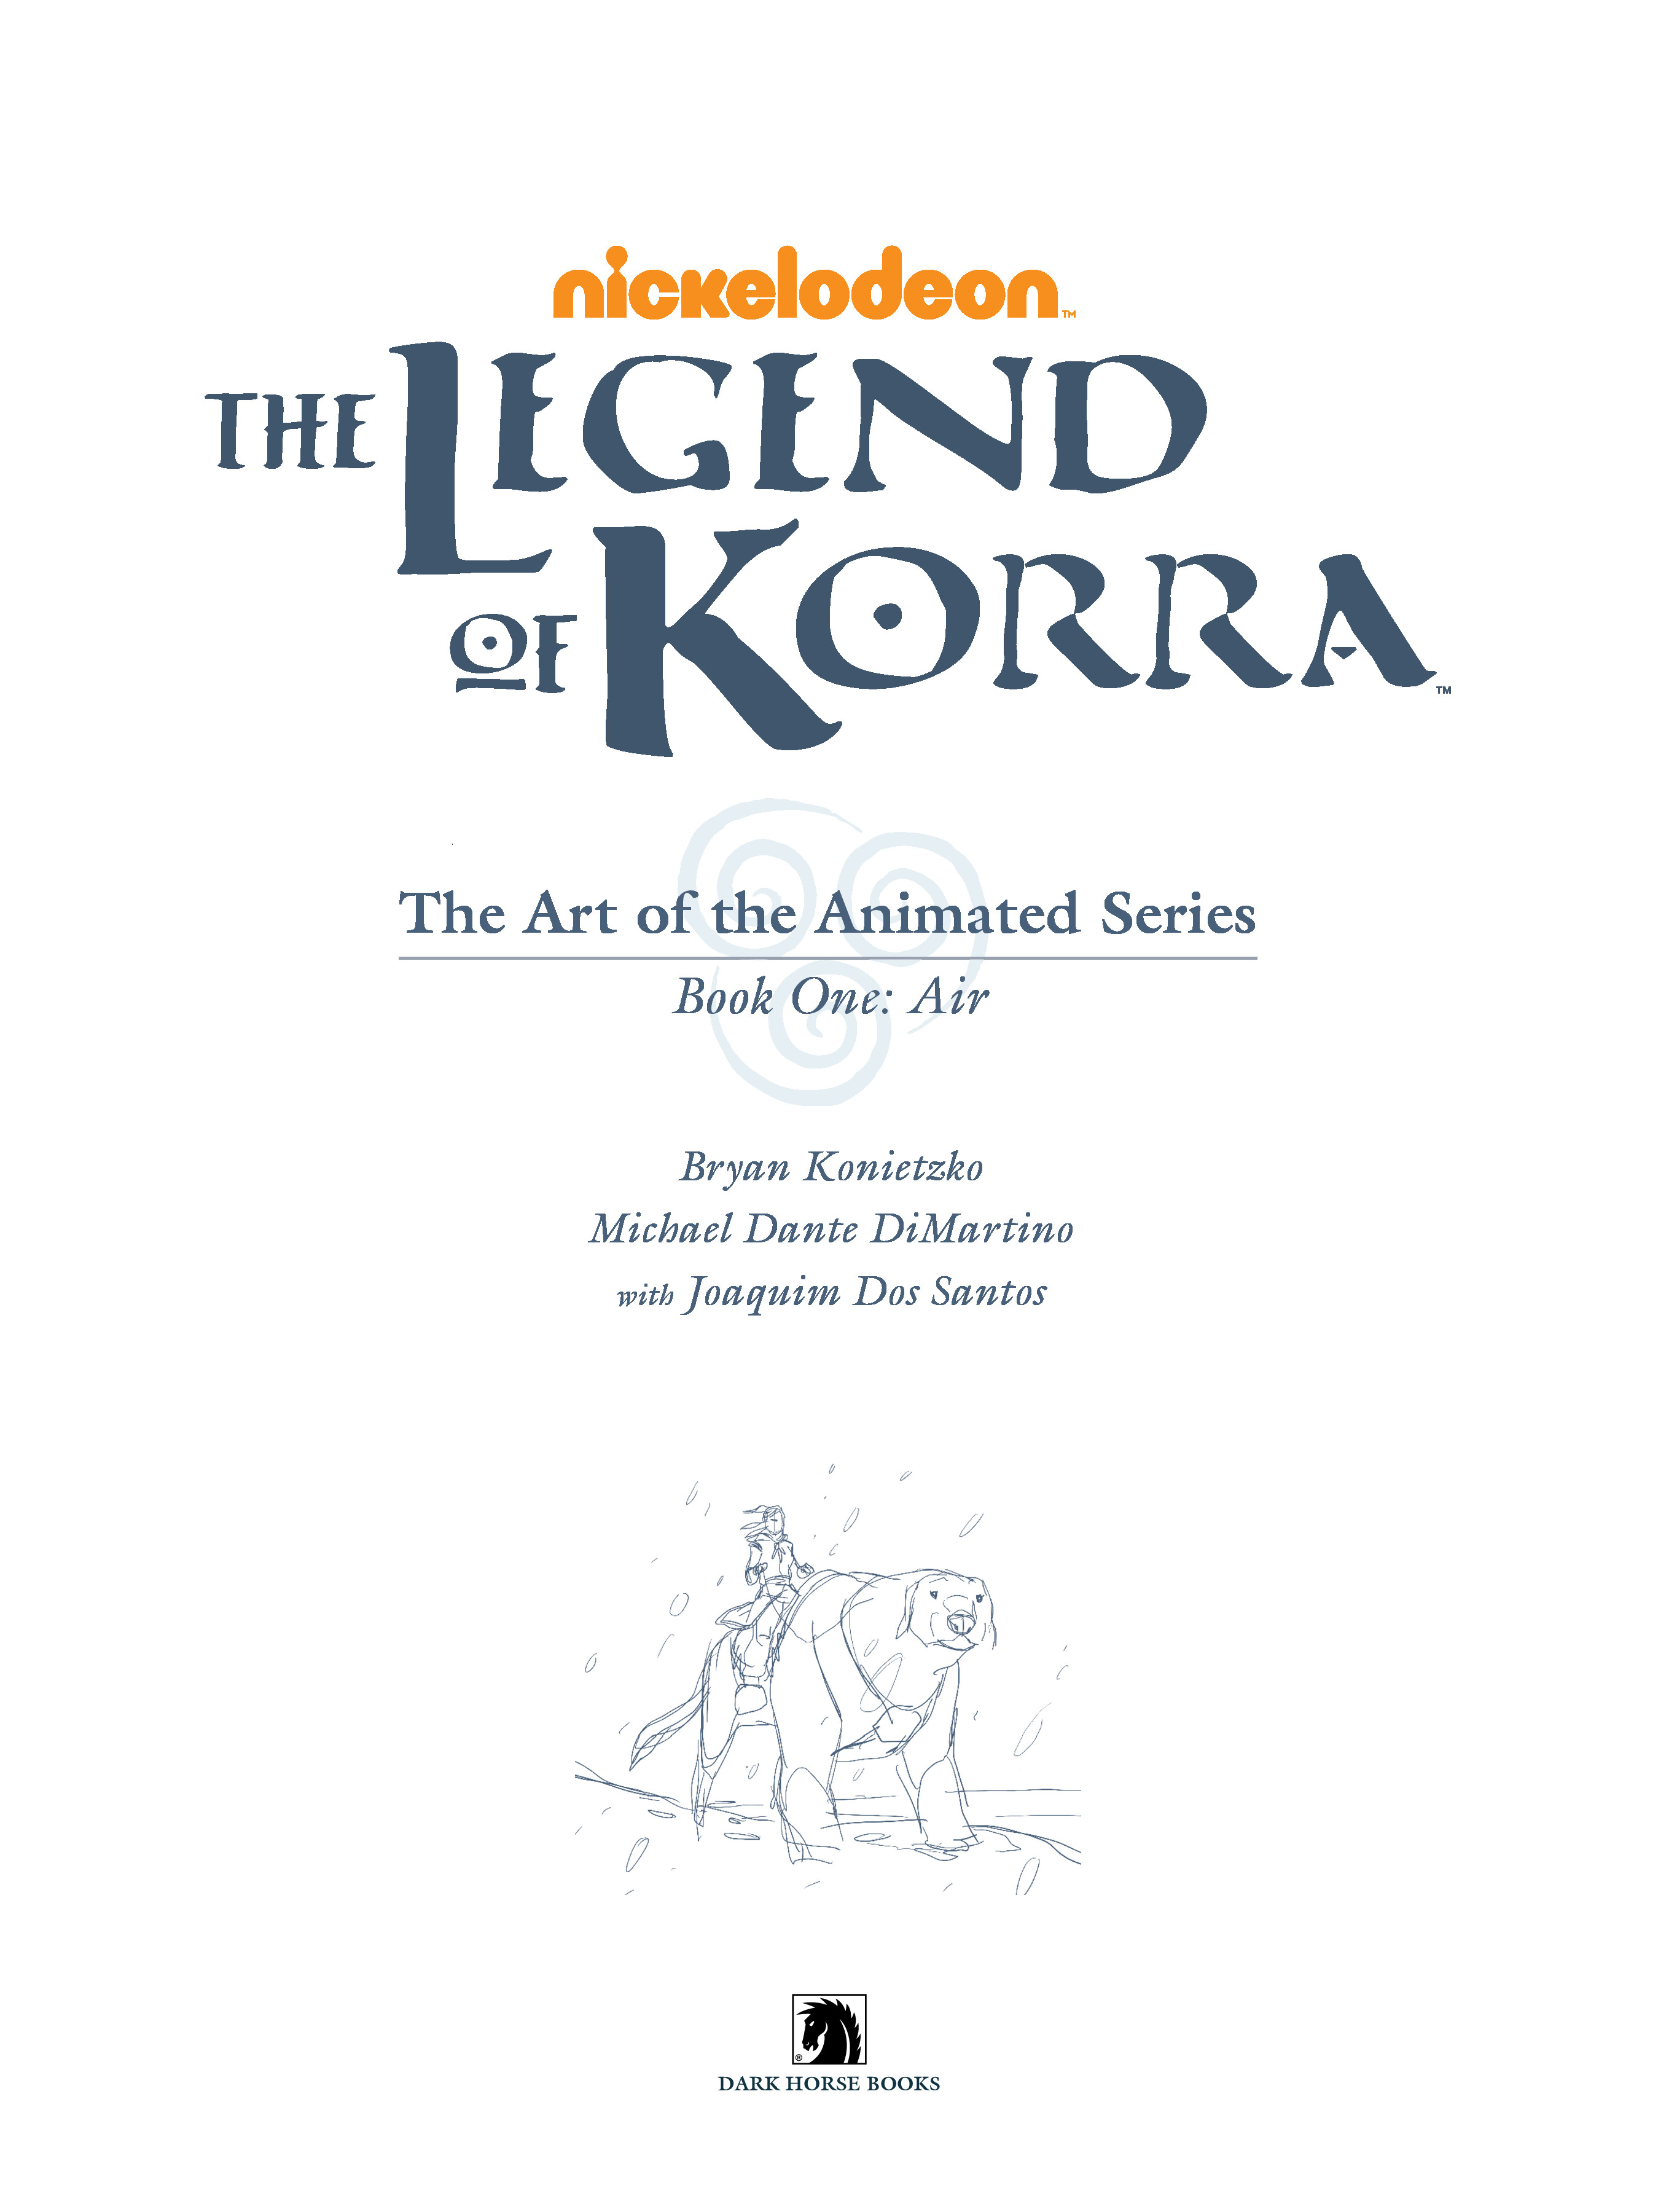 Read online The Legend of Korra: The Art of the Animated Series comic -  Issue # TPB 1 - 6